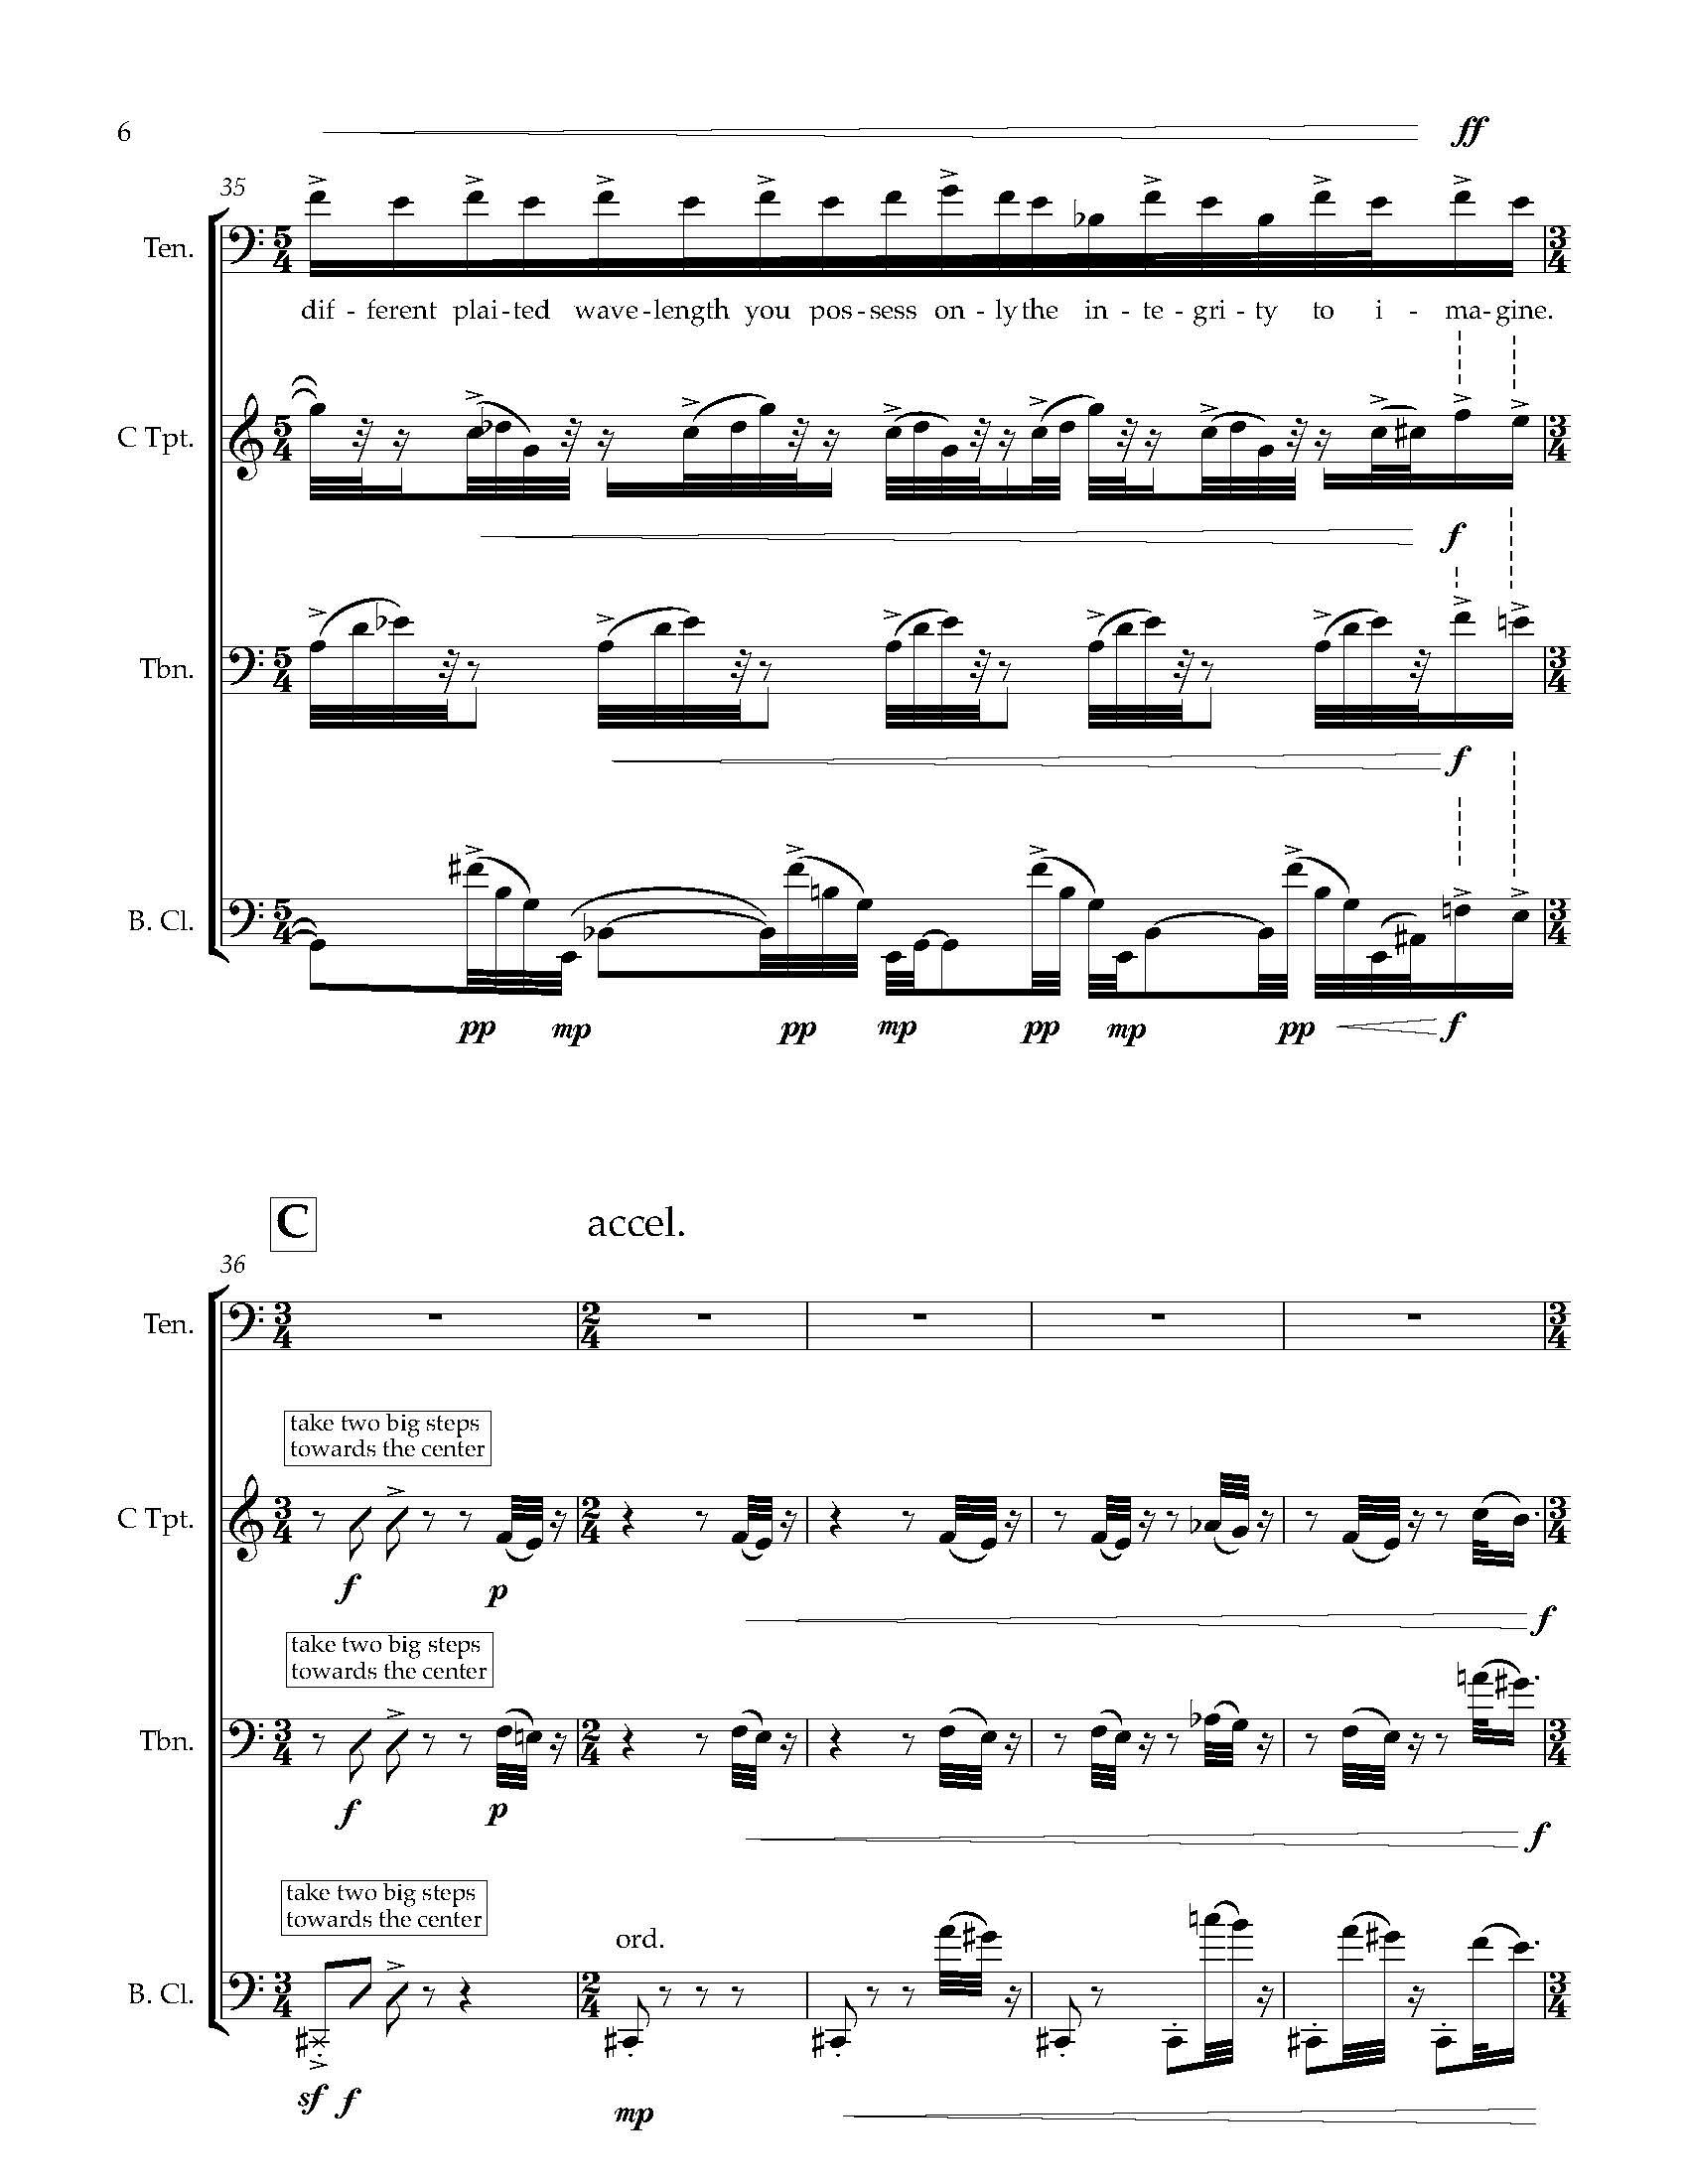 Many Worlds [1] - Complete Score_Page_15.jpg